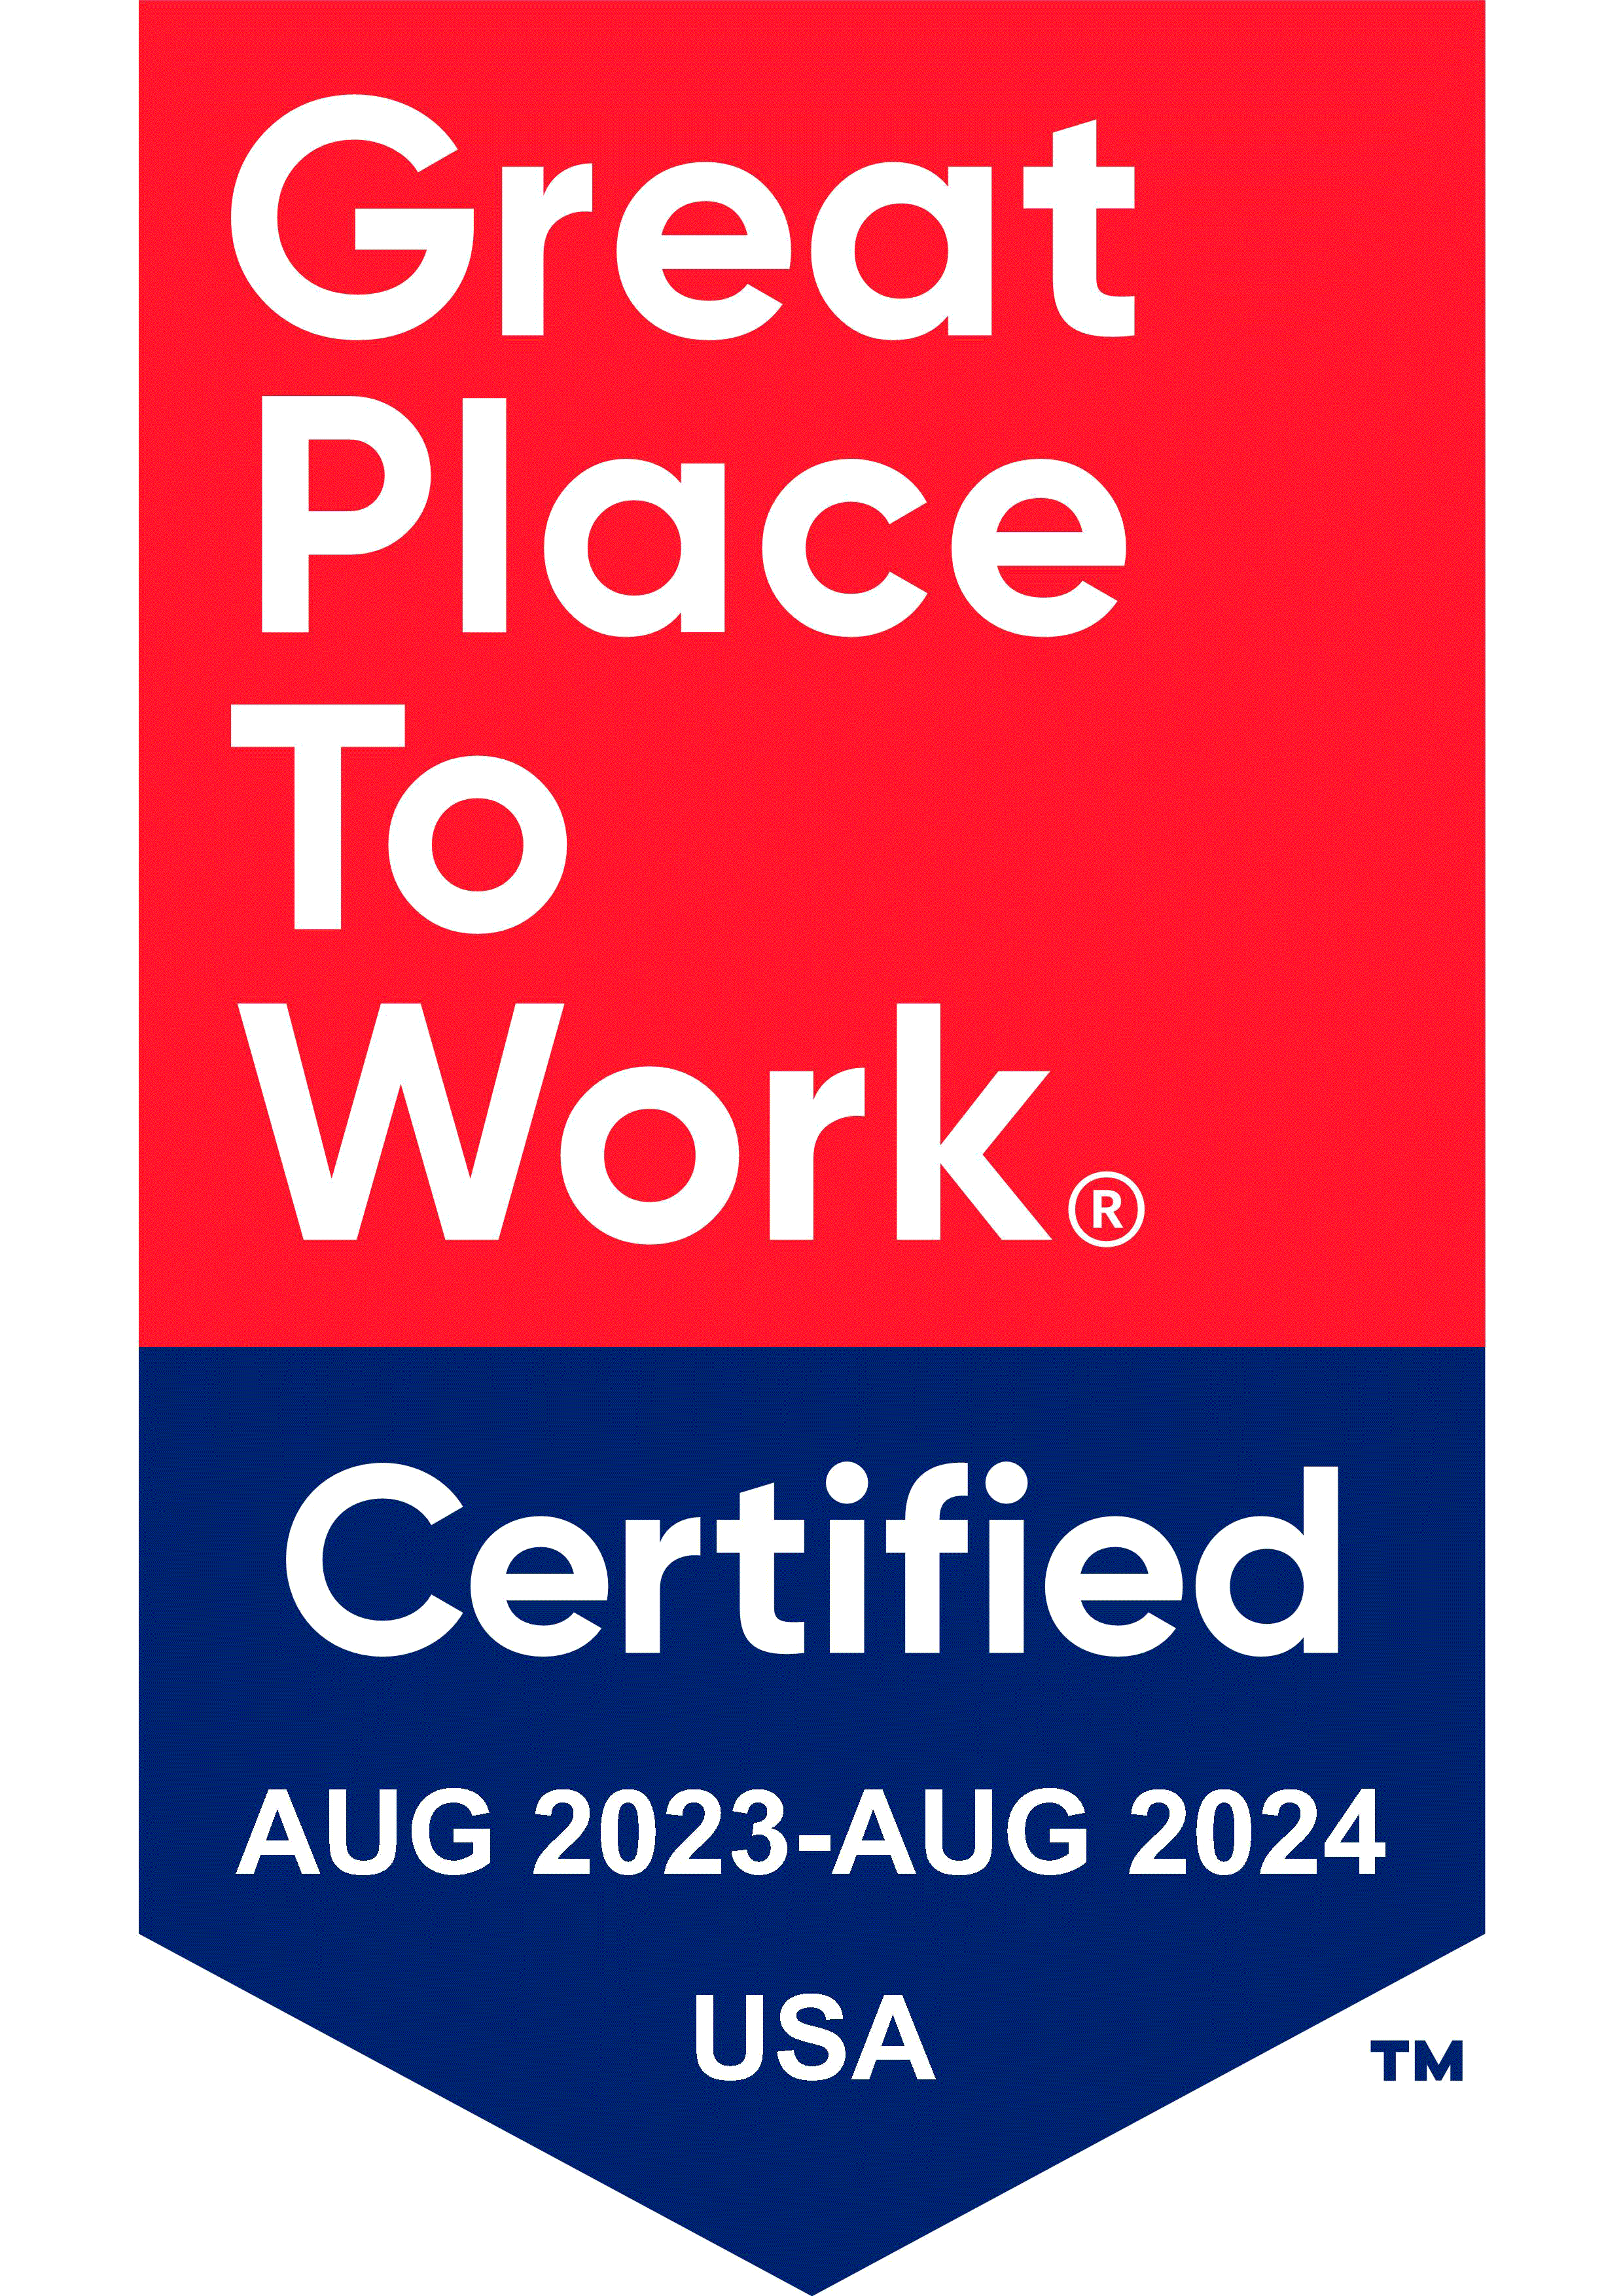 Great Place to Work' certification